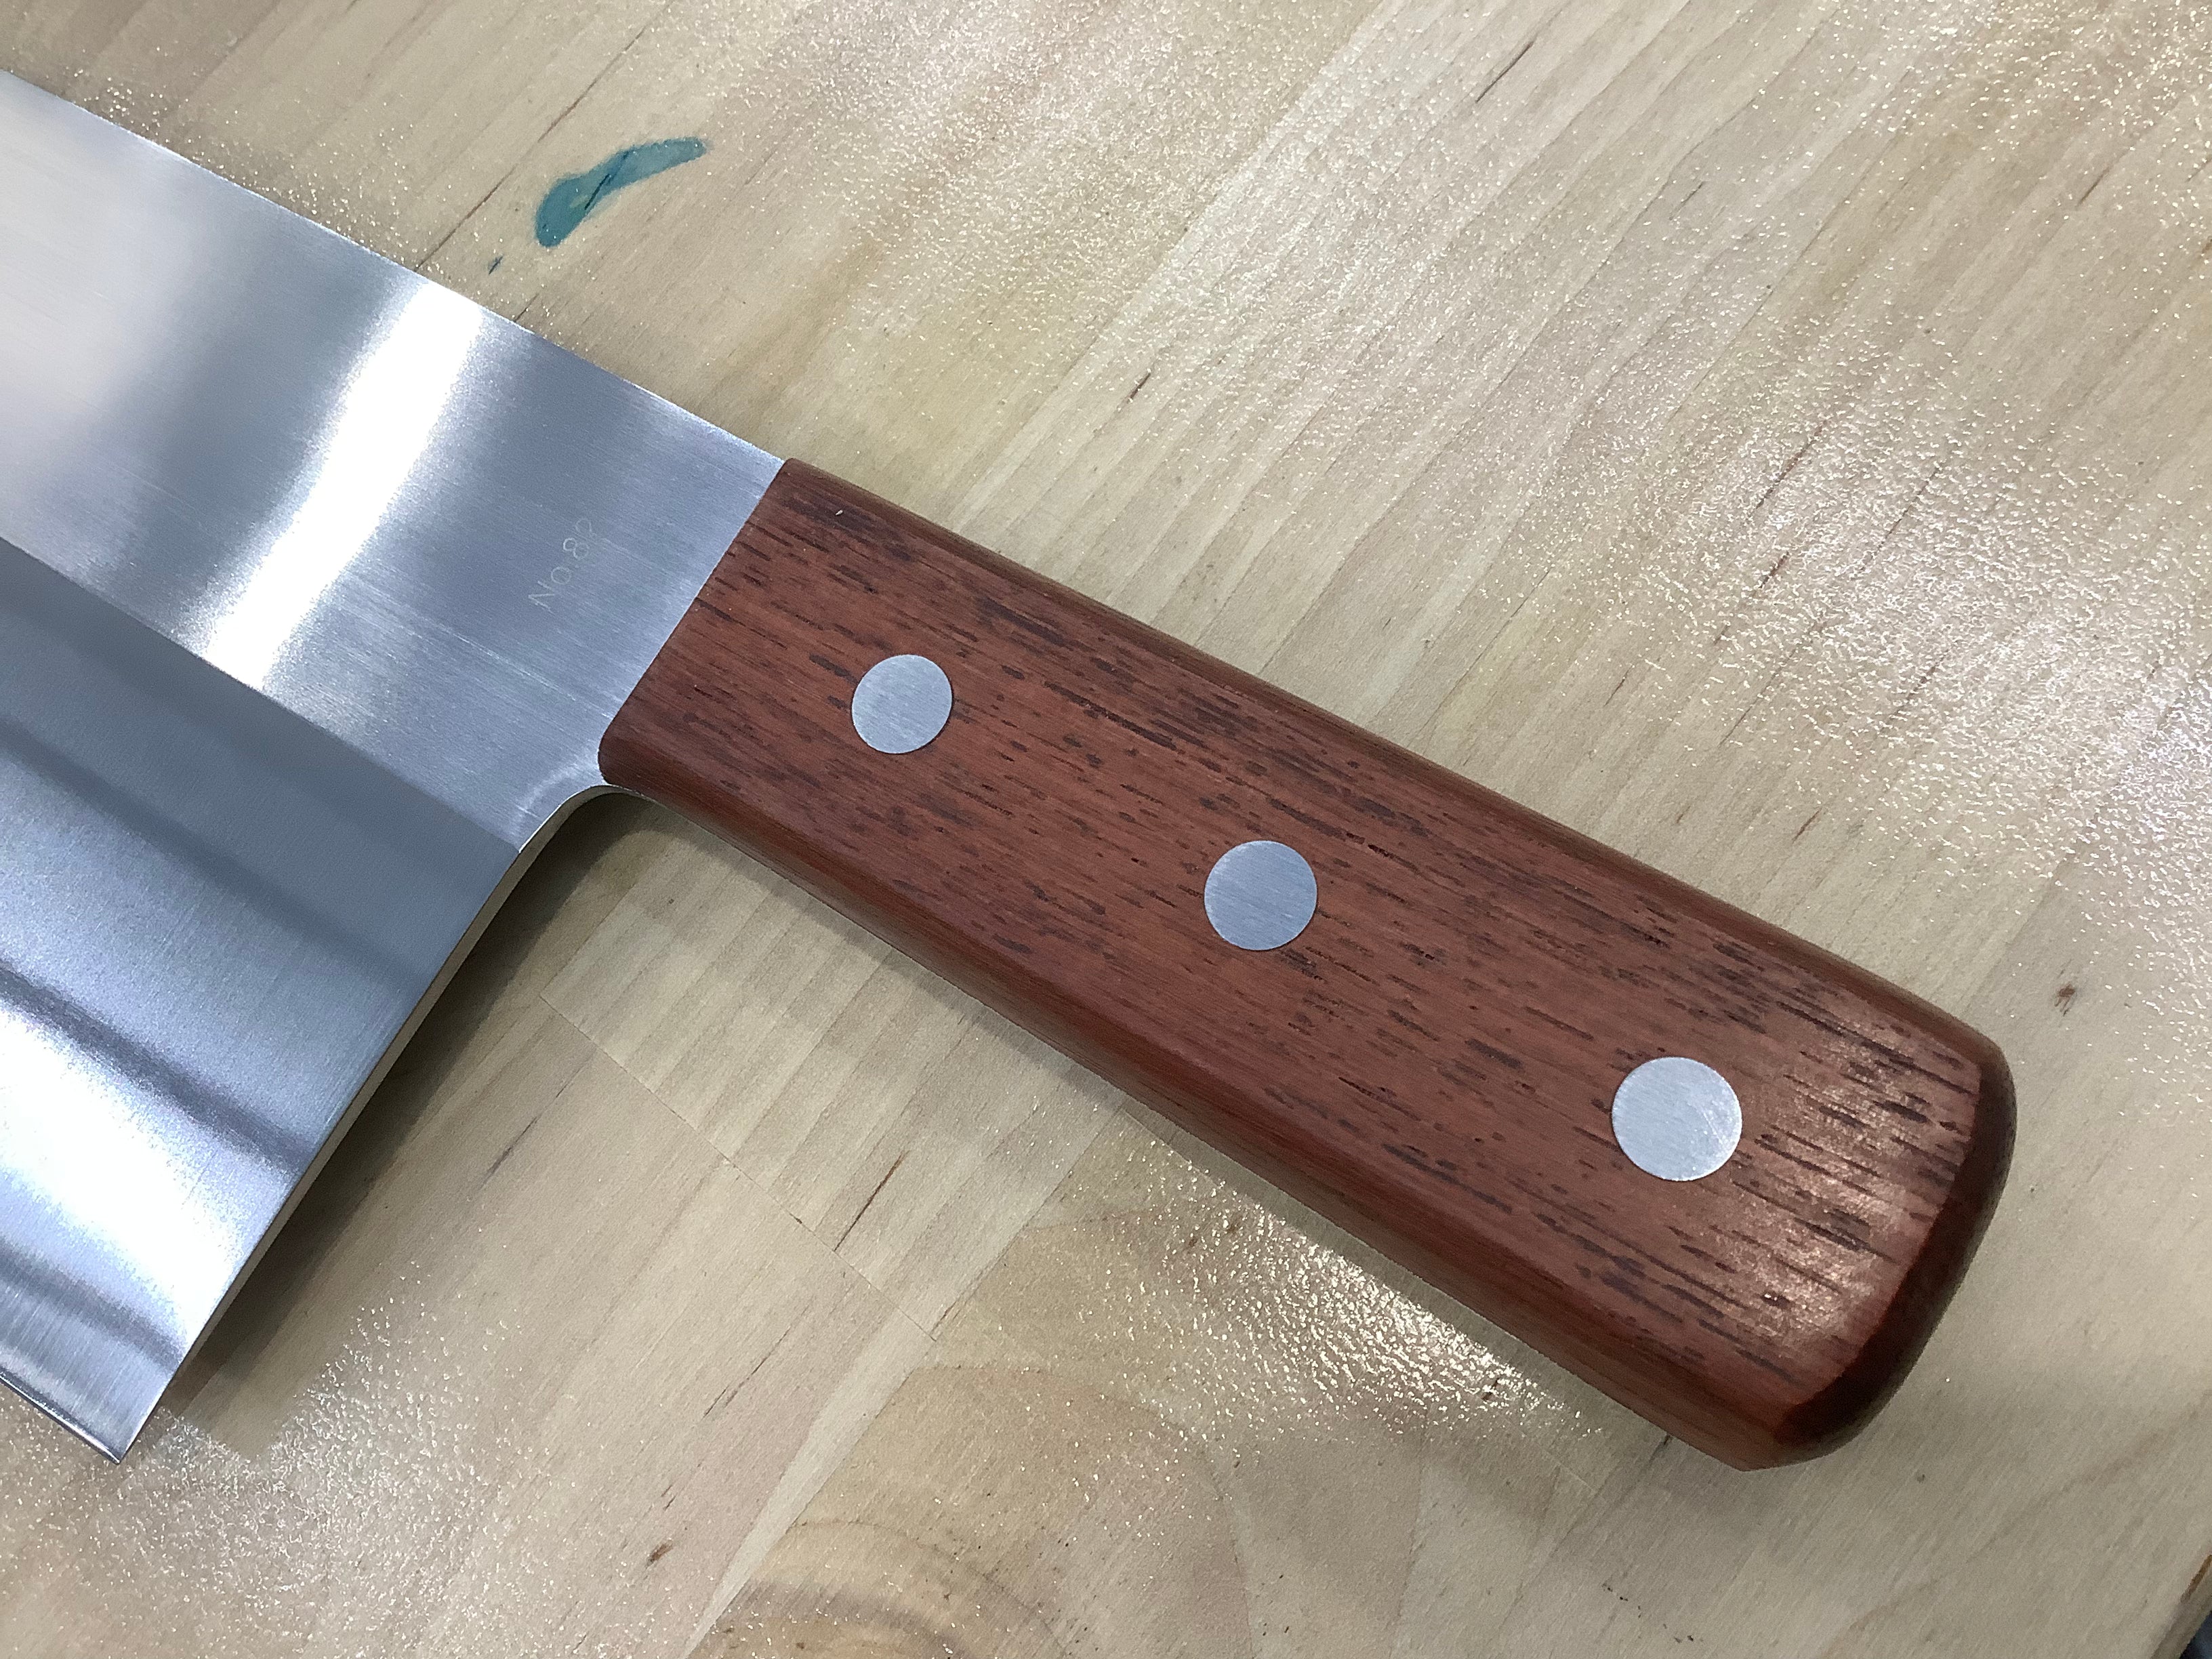 Misono 440 Chinese Cleaver 8.6"